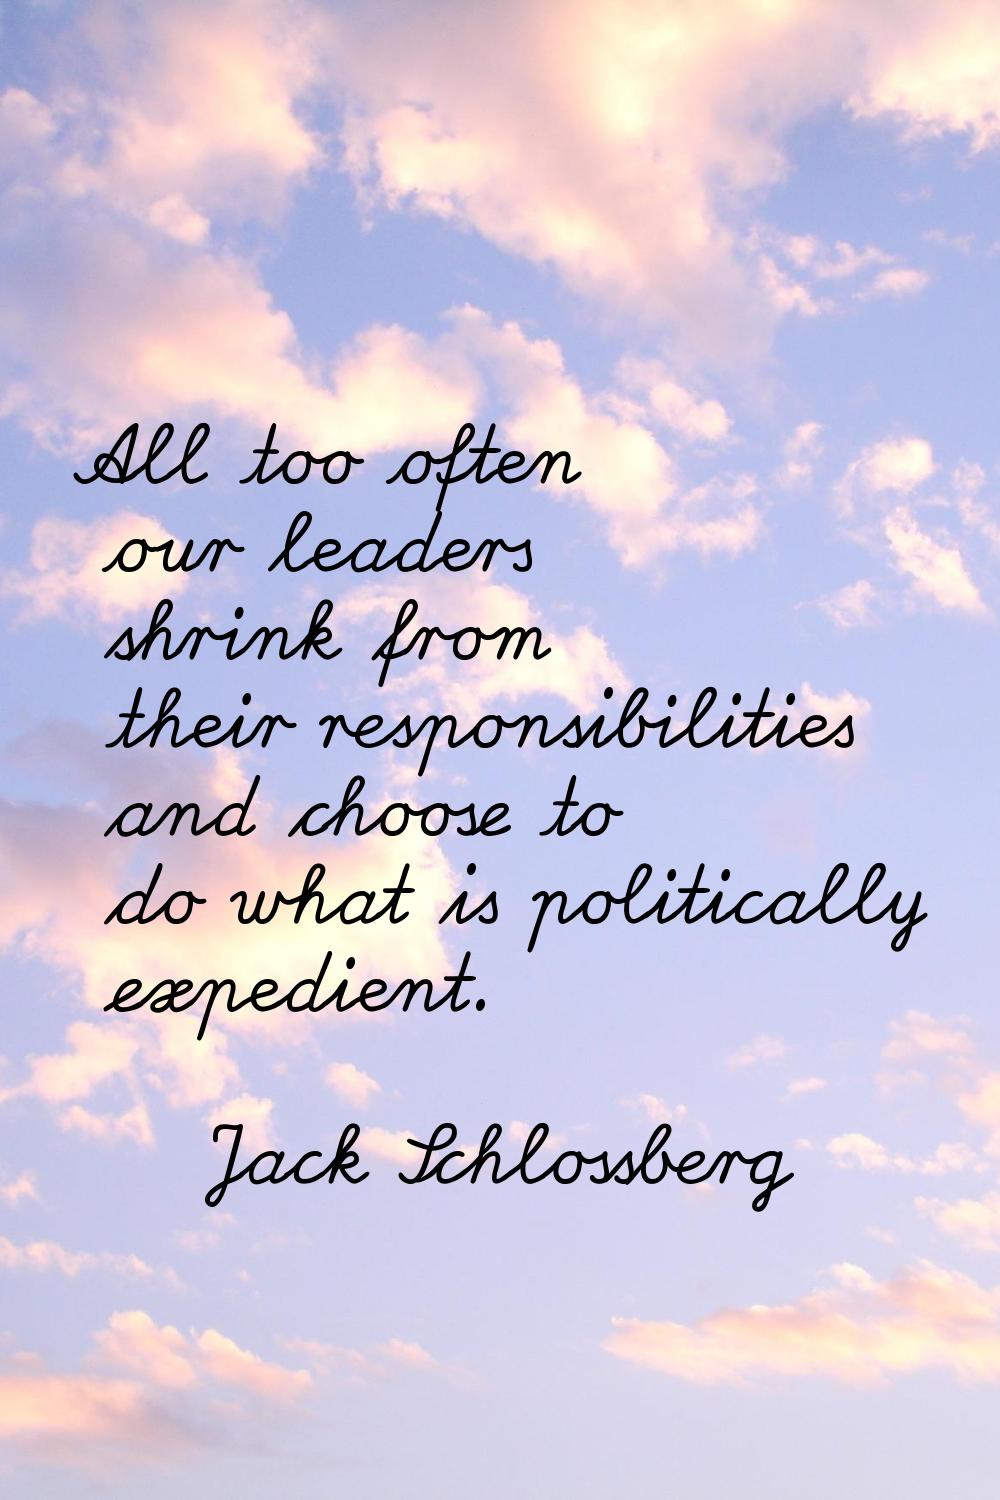 All too often our leaders shrink from their responsibilities and choose to do what is politically e